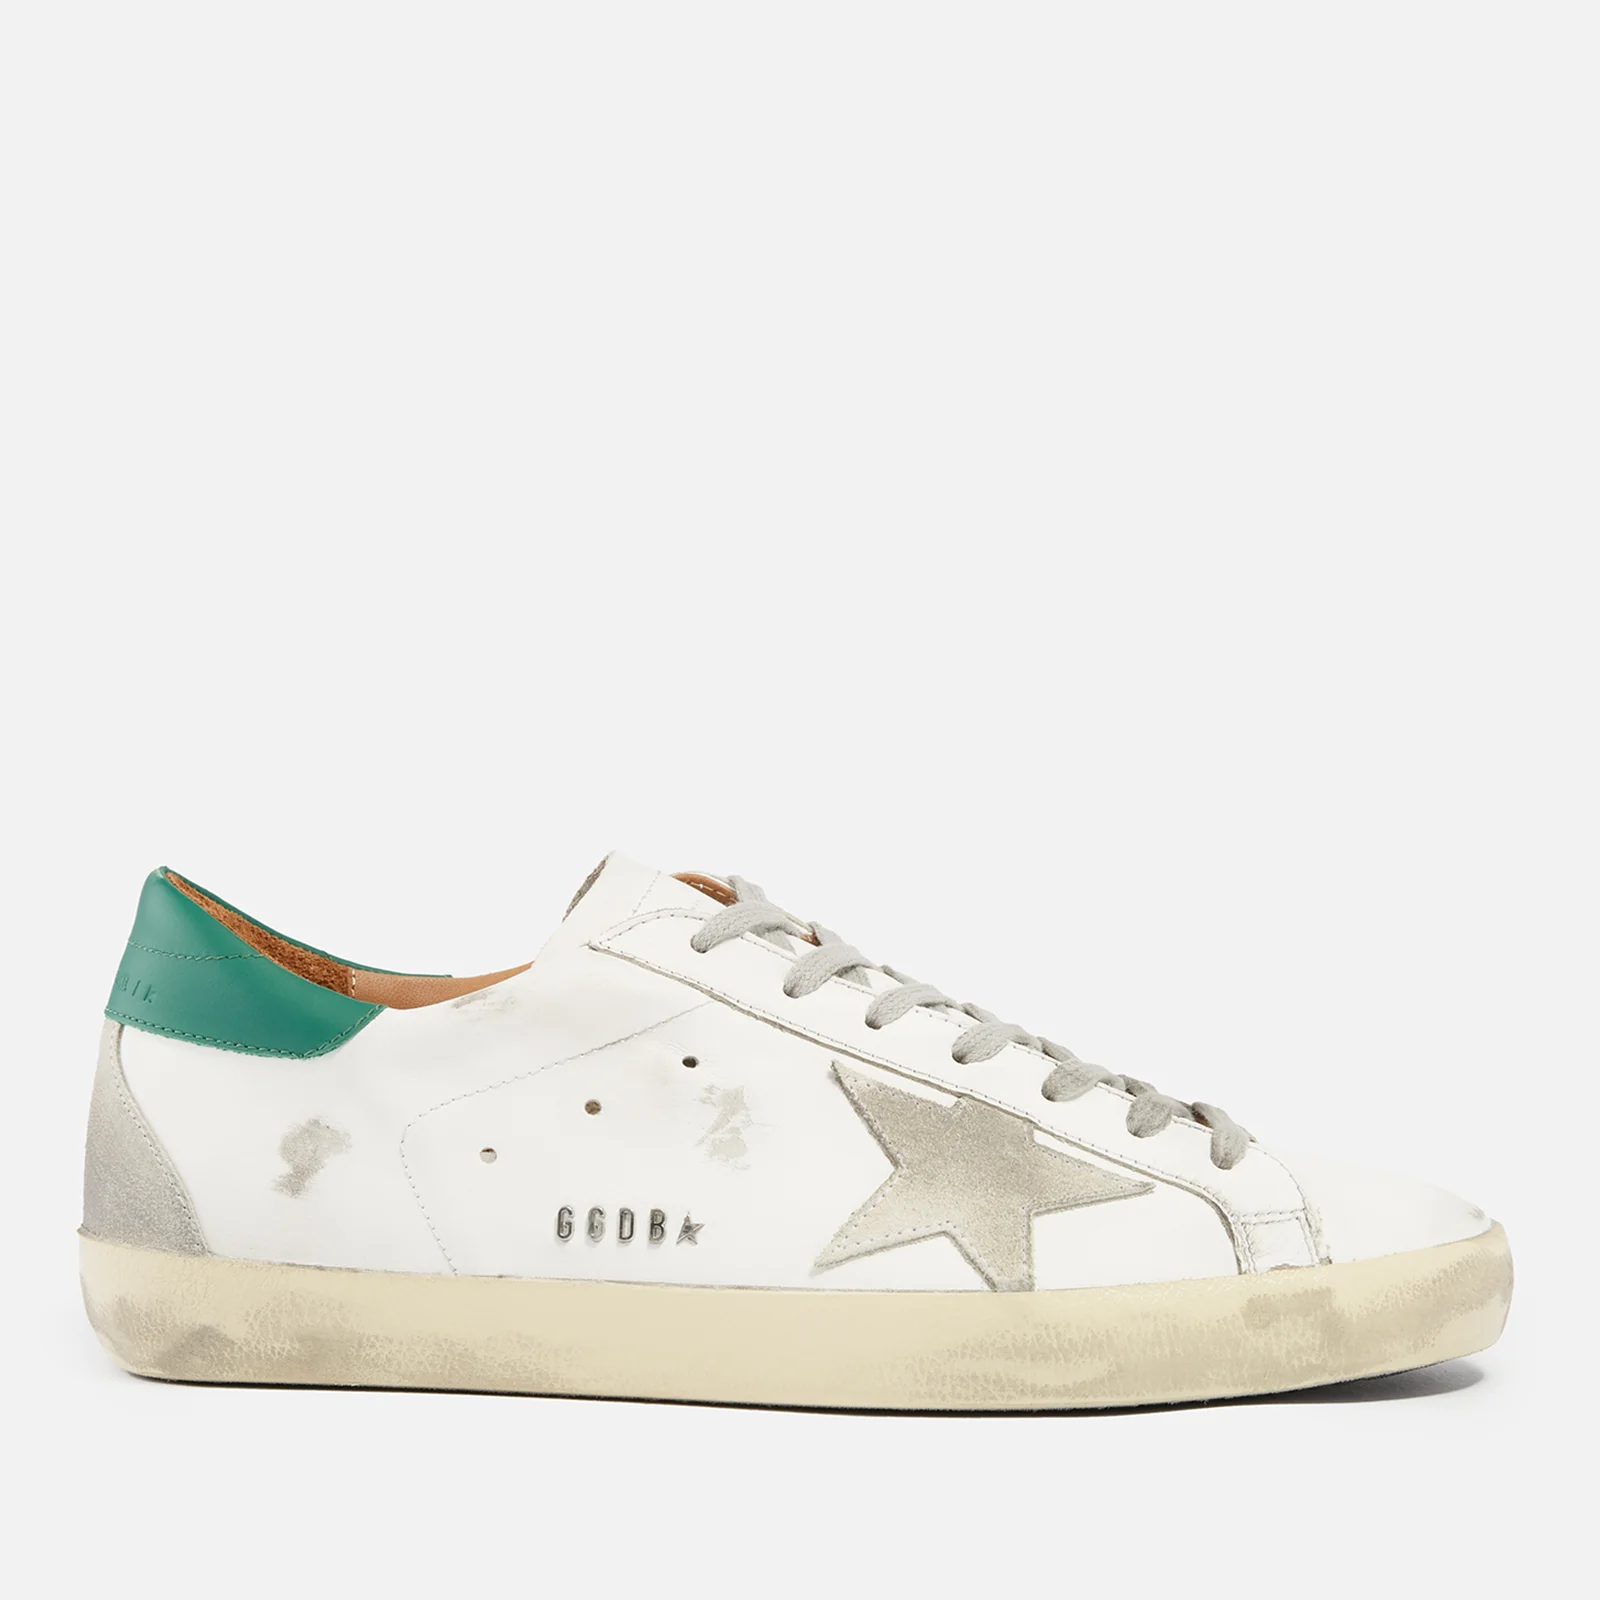 Golden Goose Men's Superstar Leather Trainers - White/Ice/Green Image 1